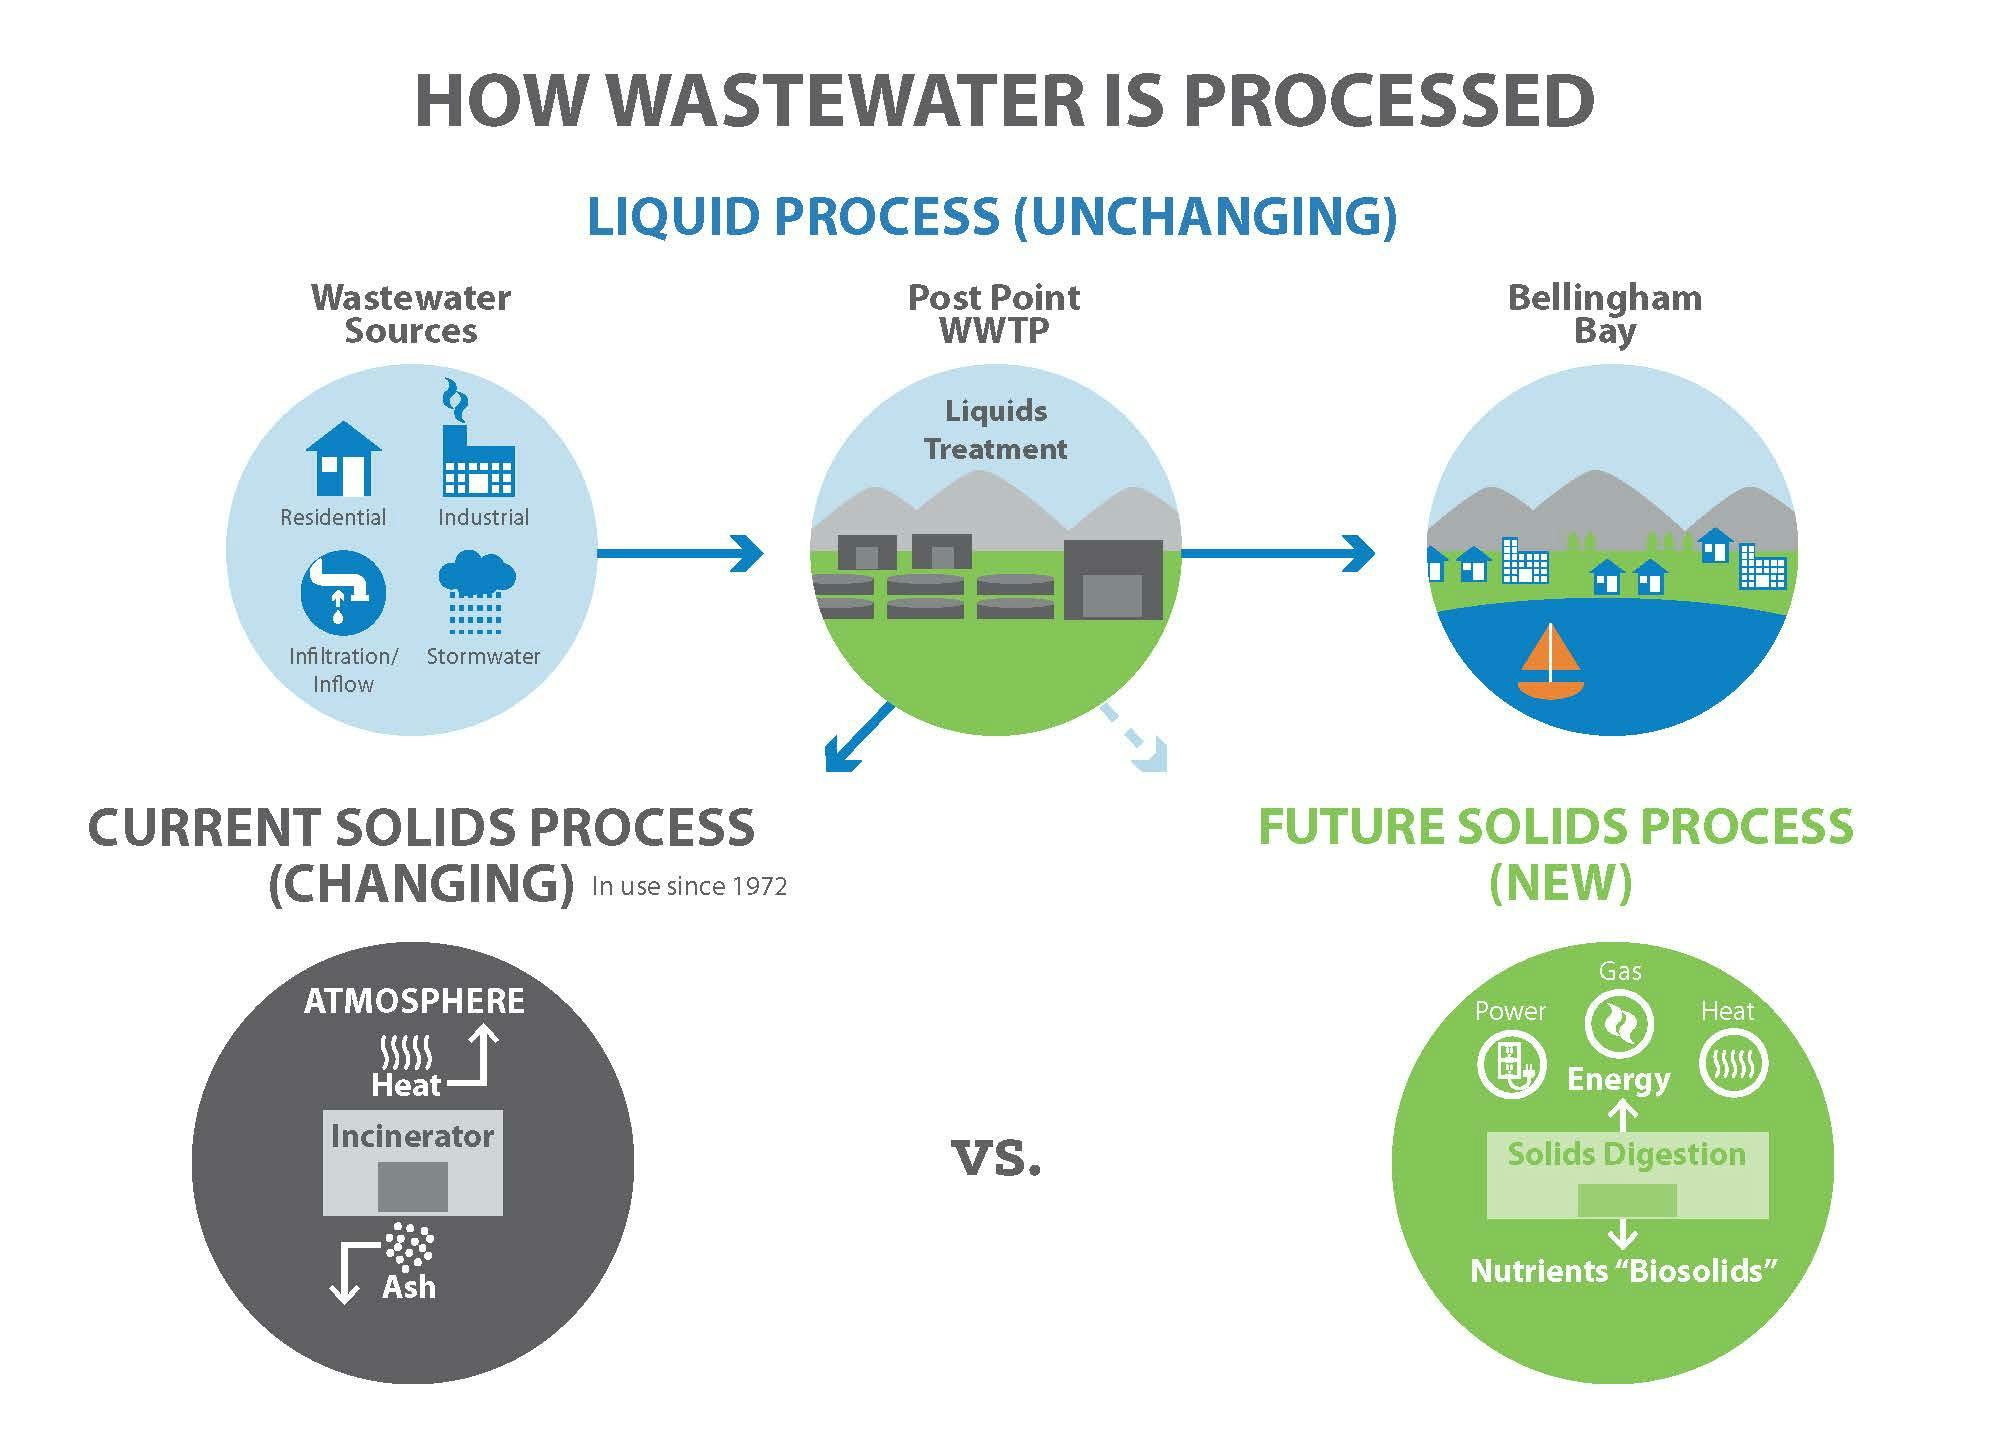 How wastewater is processed